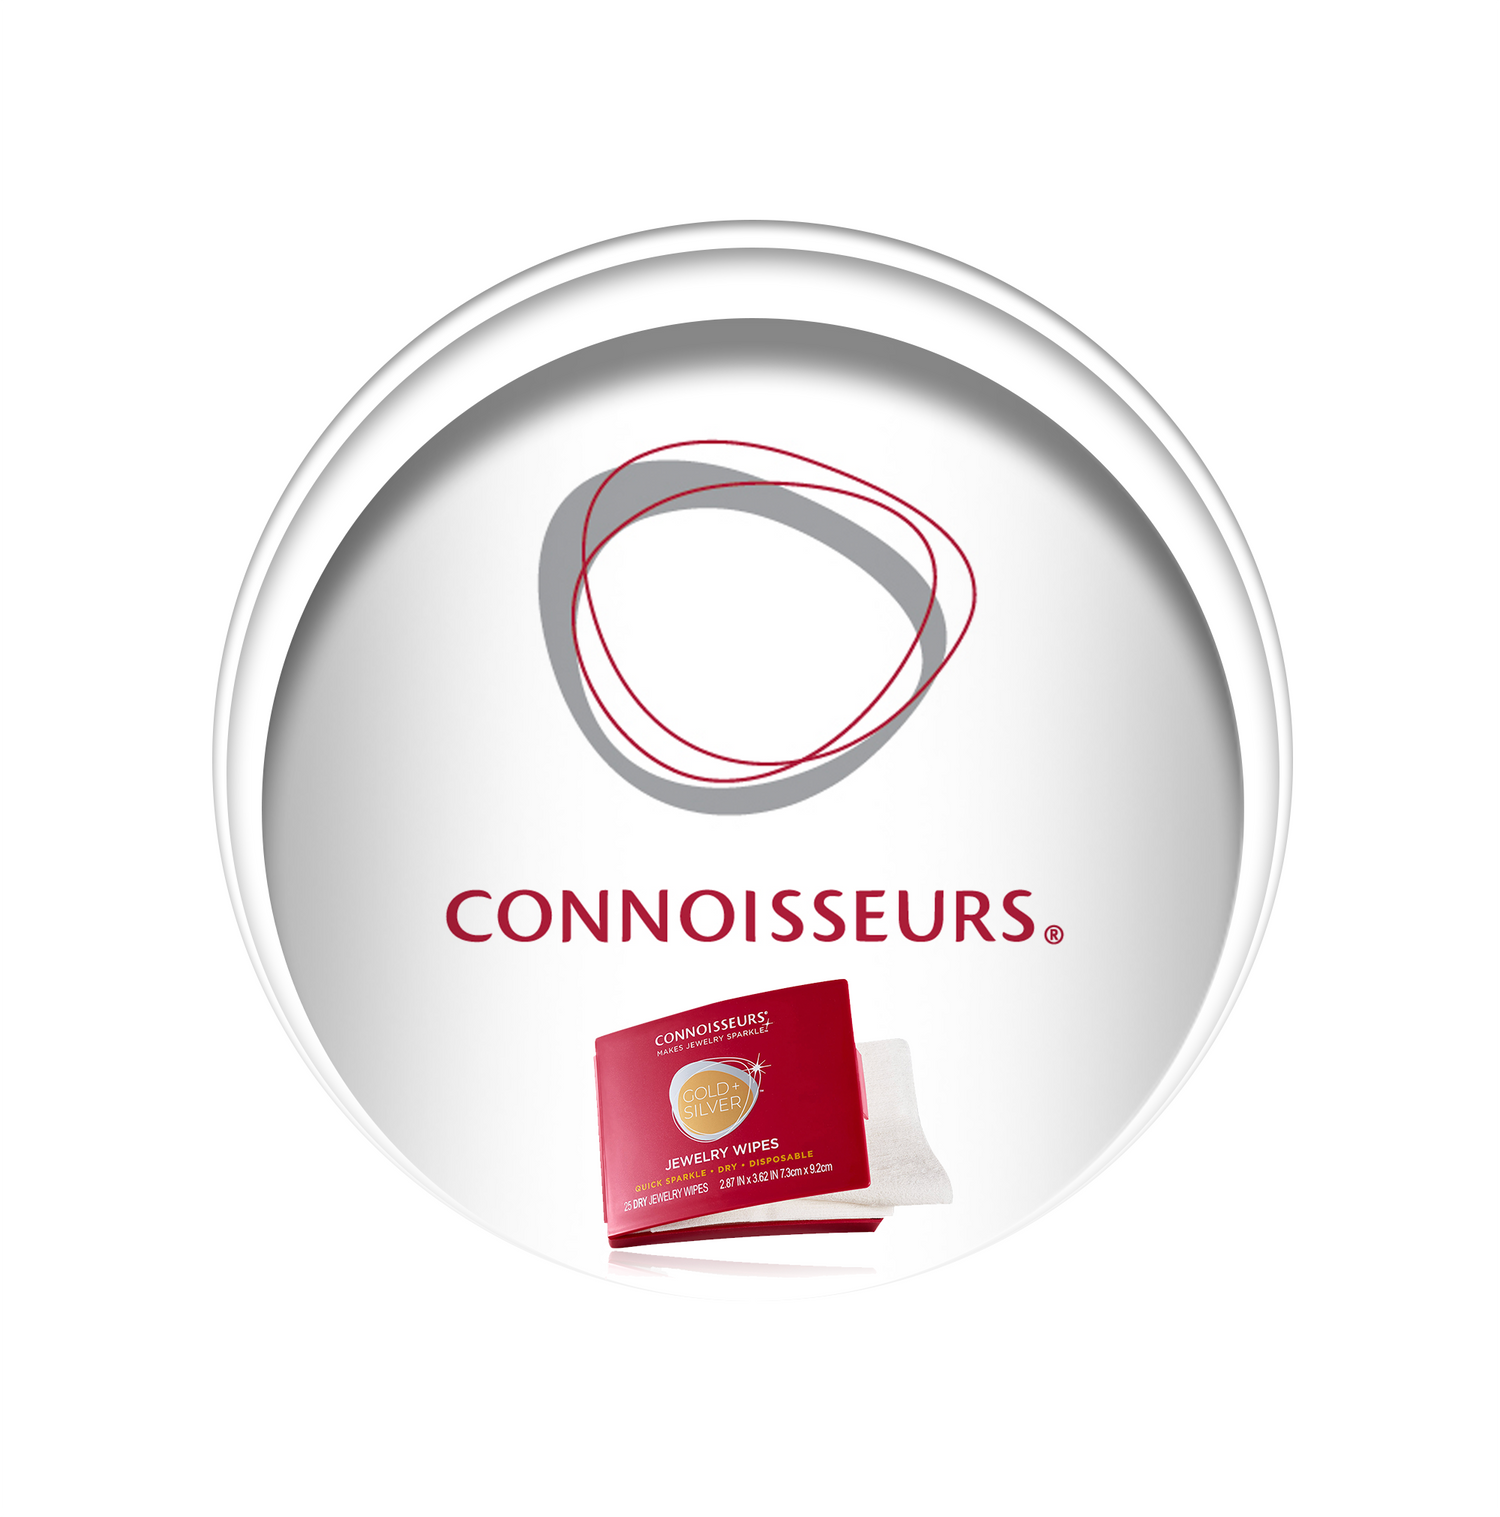 Consumers, jewellers, merchants, fashion/beauty editors, and bloggers all favour the Connoisseurs brand because they appreciate its effectiveness, global brand leadership, and timeless design.